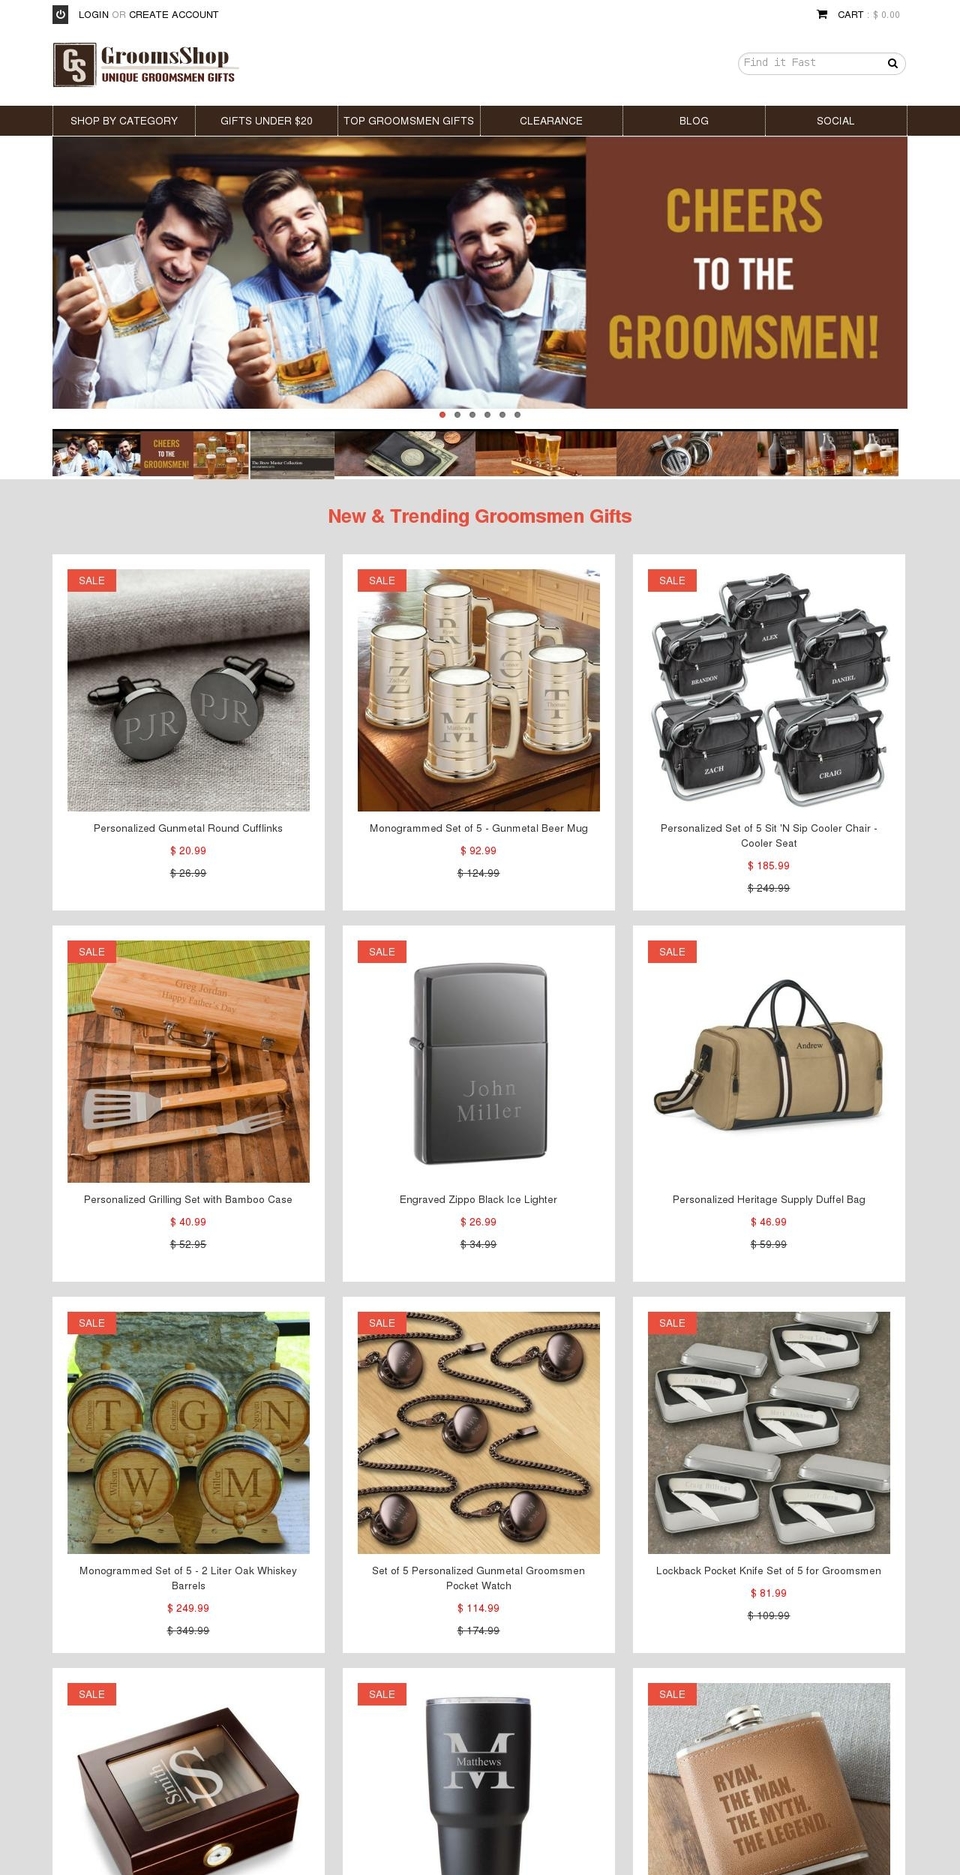 Expanse Shopify theme site example groomsshop.com